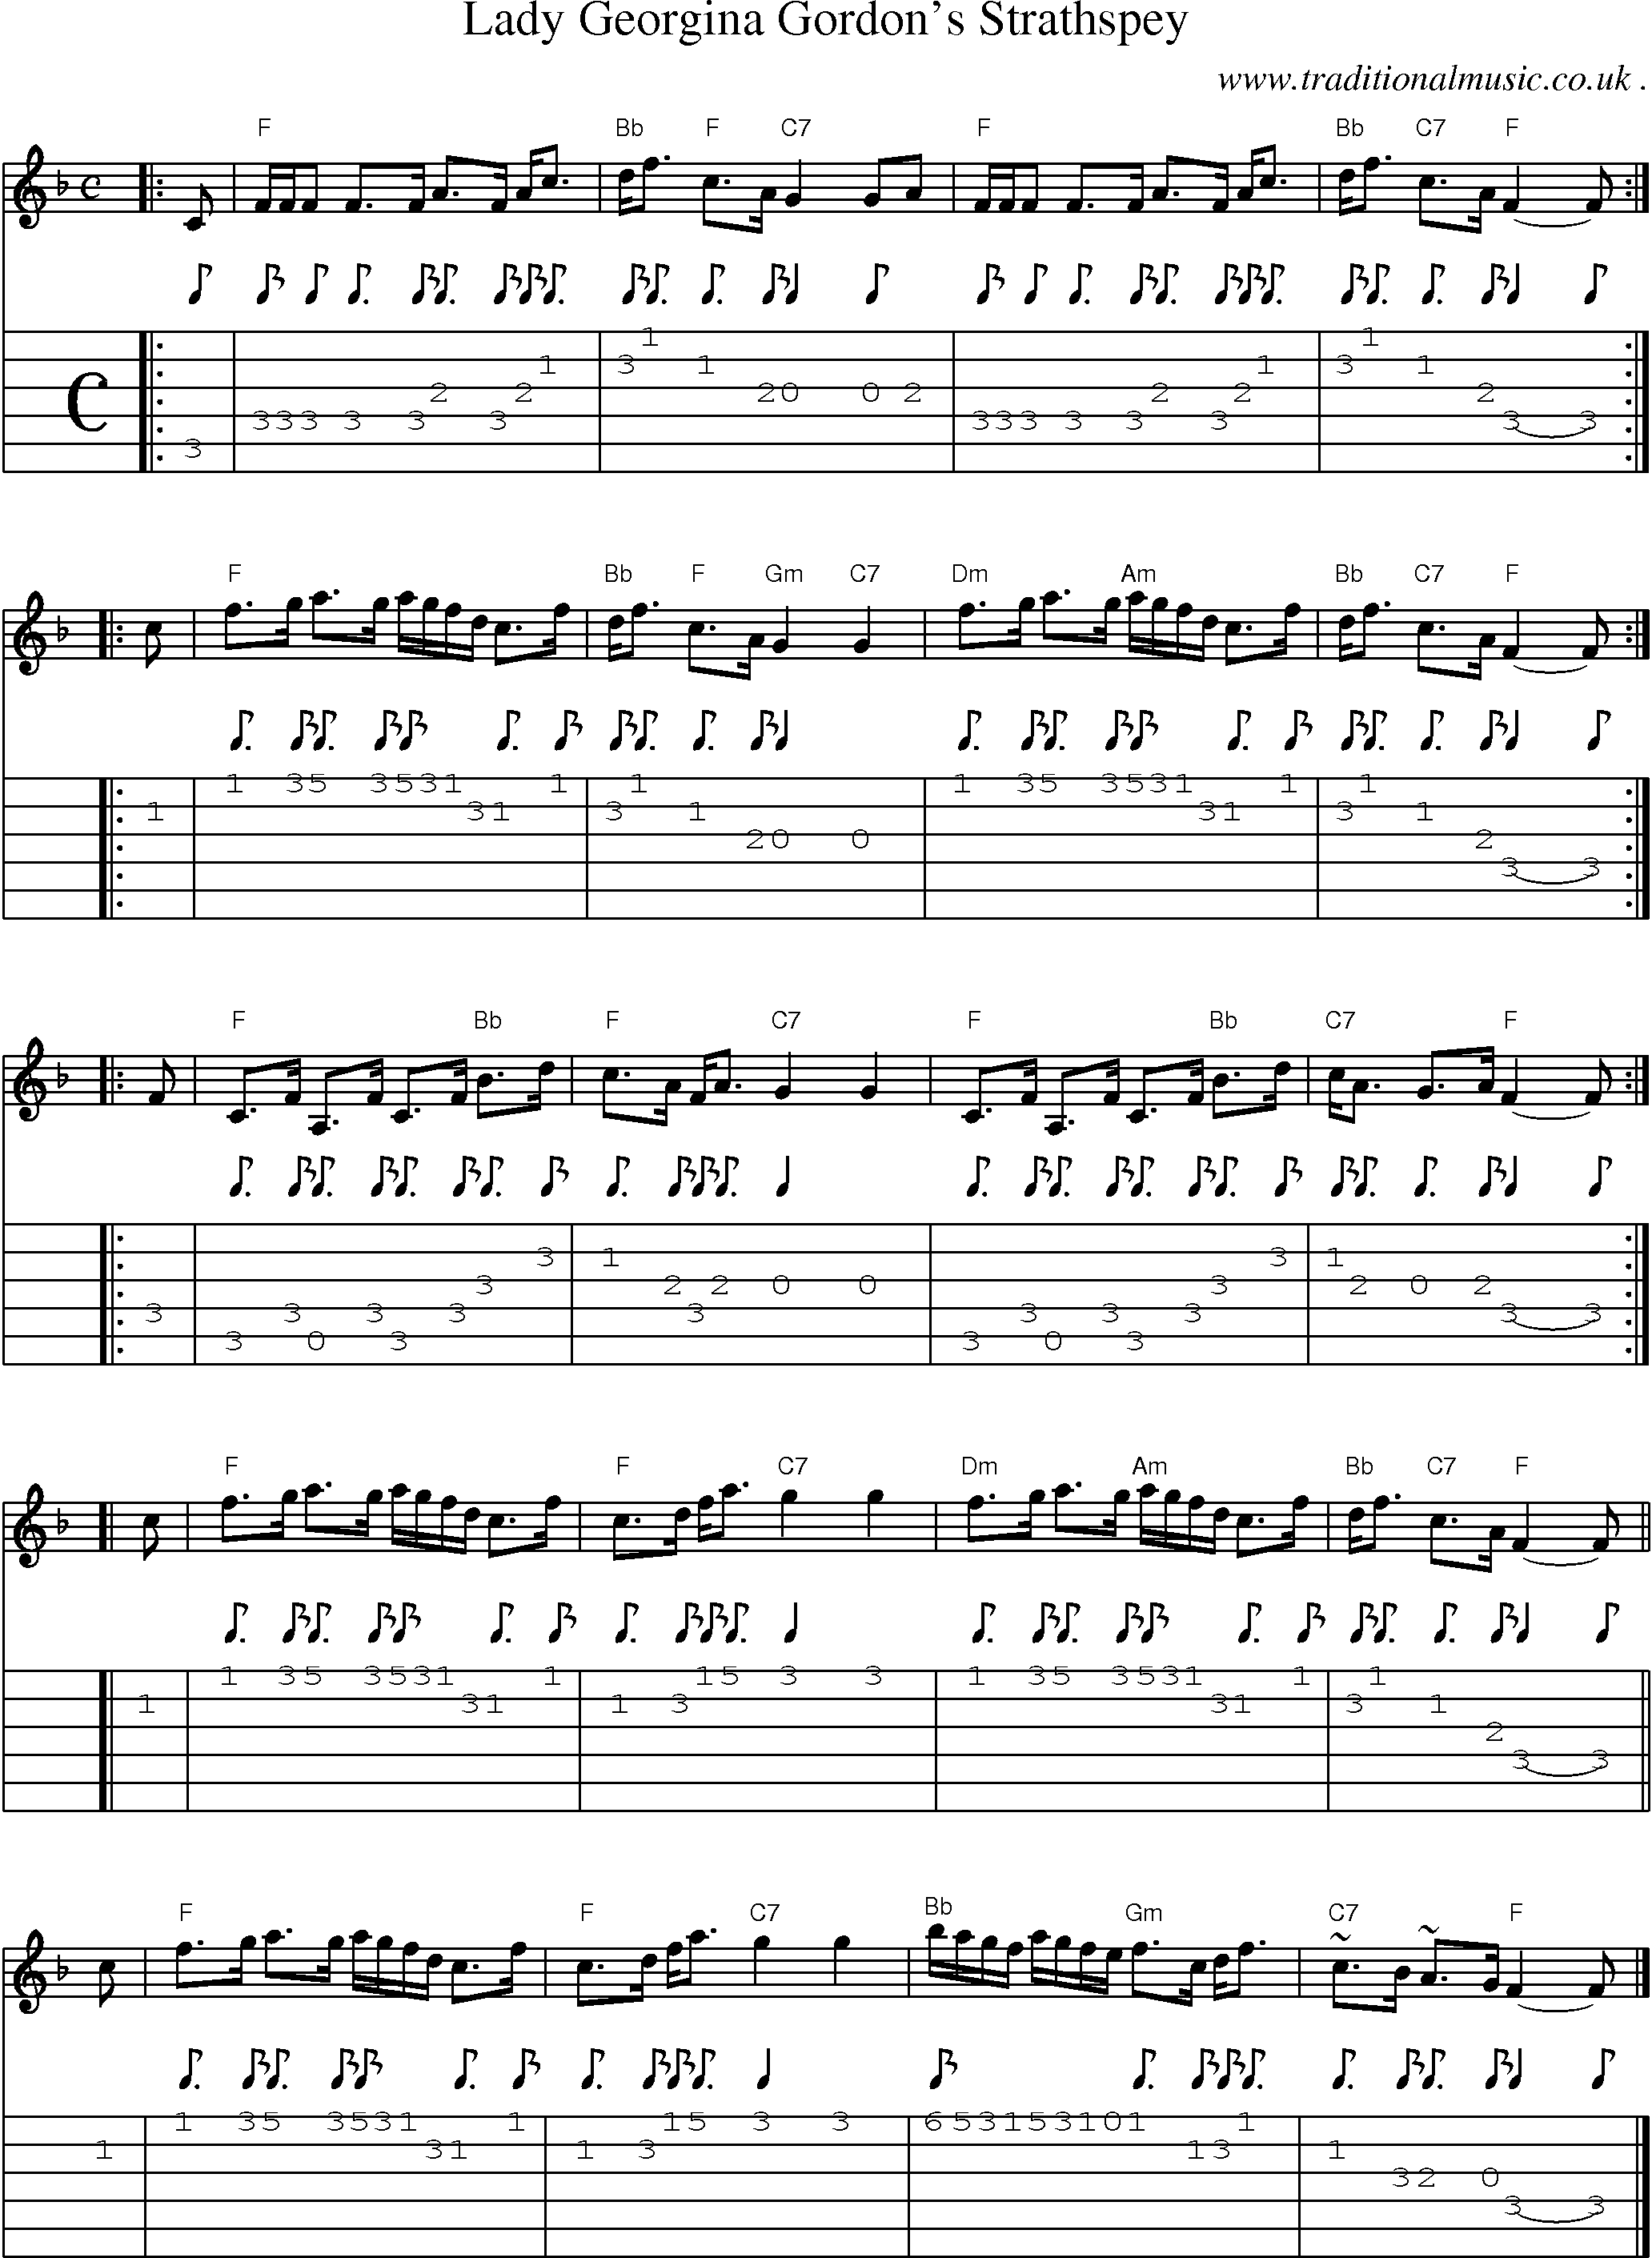 Sheet-music  score, Chords and Guitar Tabs for Lady Georgina Gordons Strathspey